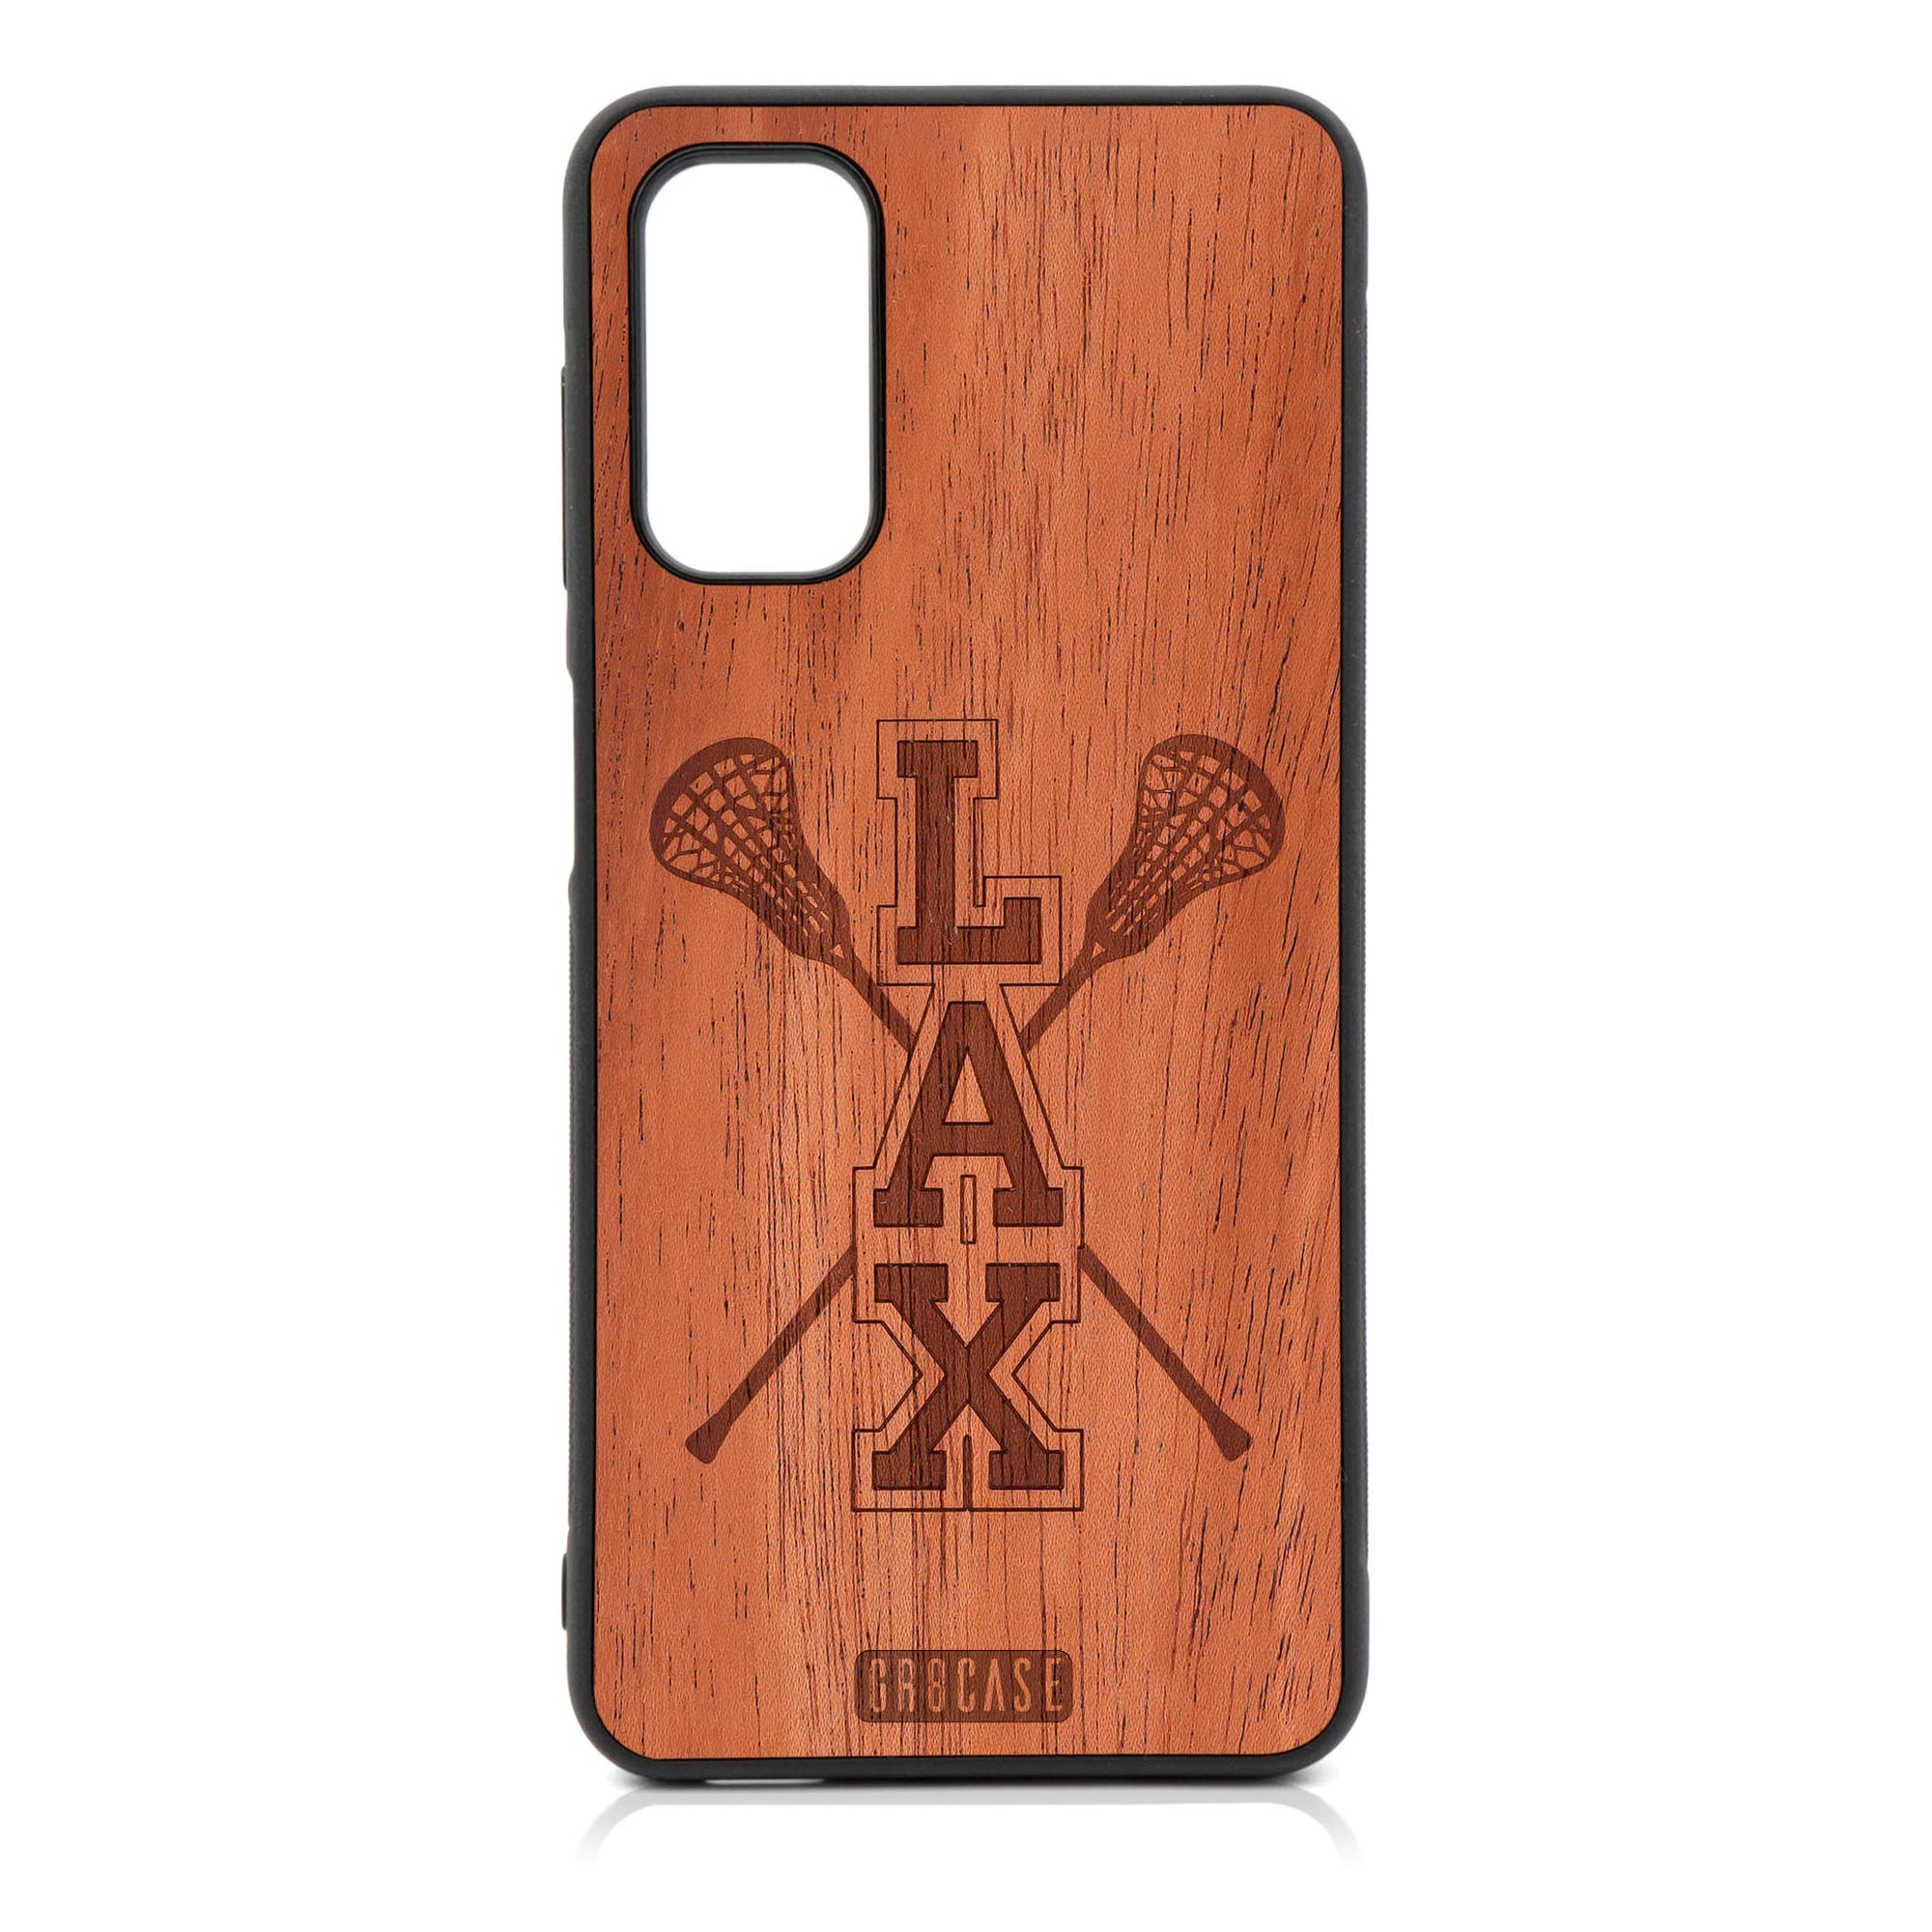 Lacrosse (LAX) Sticks Design Wood Case For Galaxy A13 5G